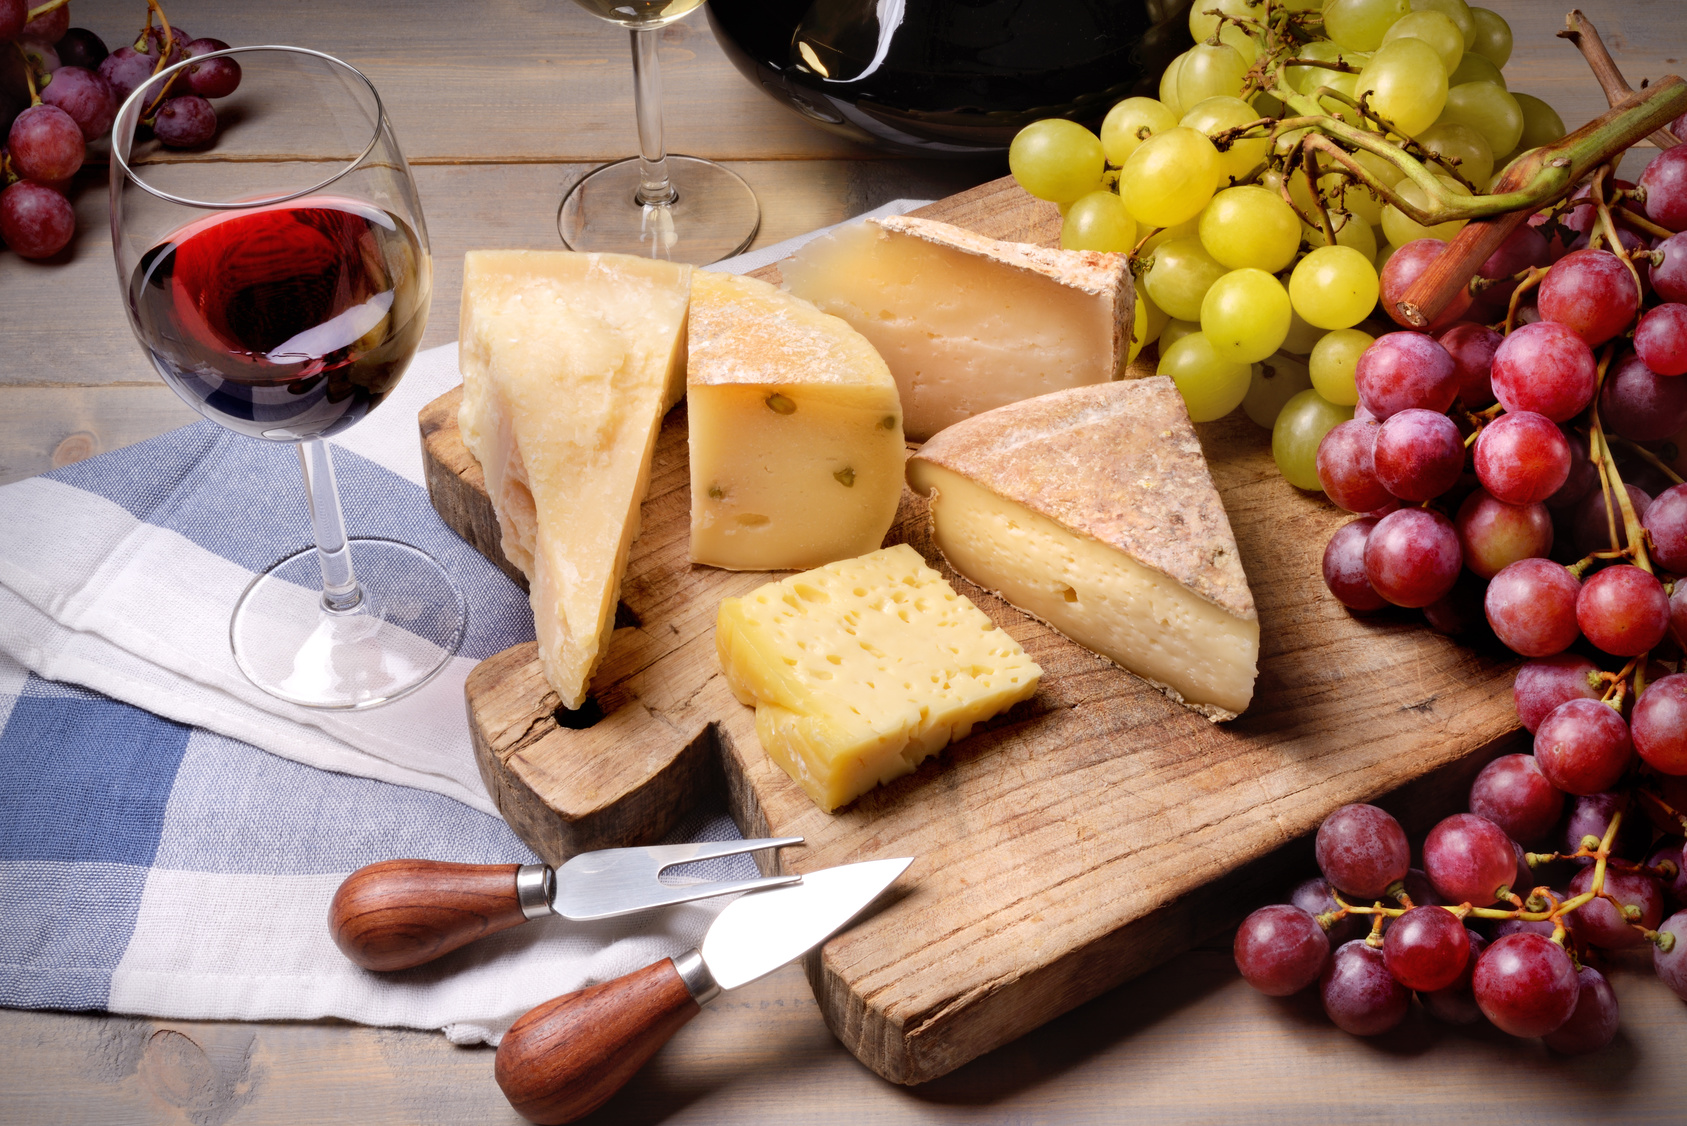 Red wine, grapes and cheese